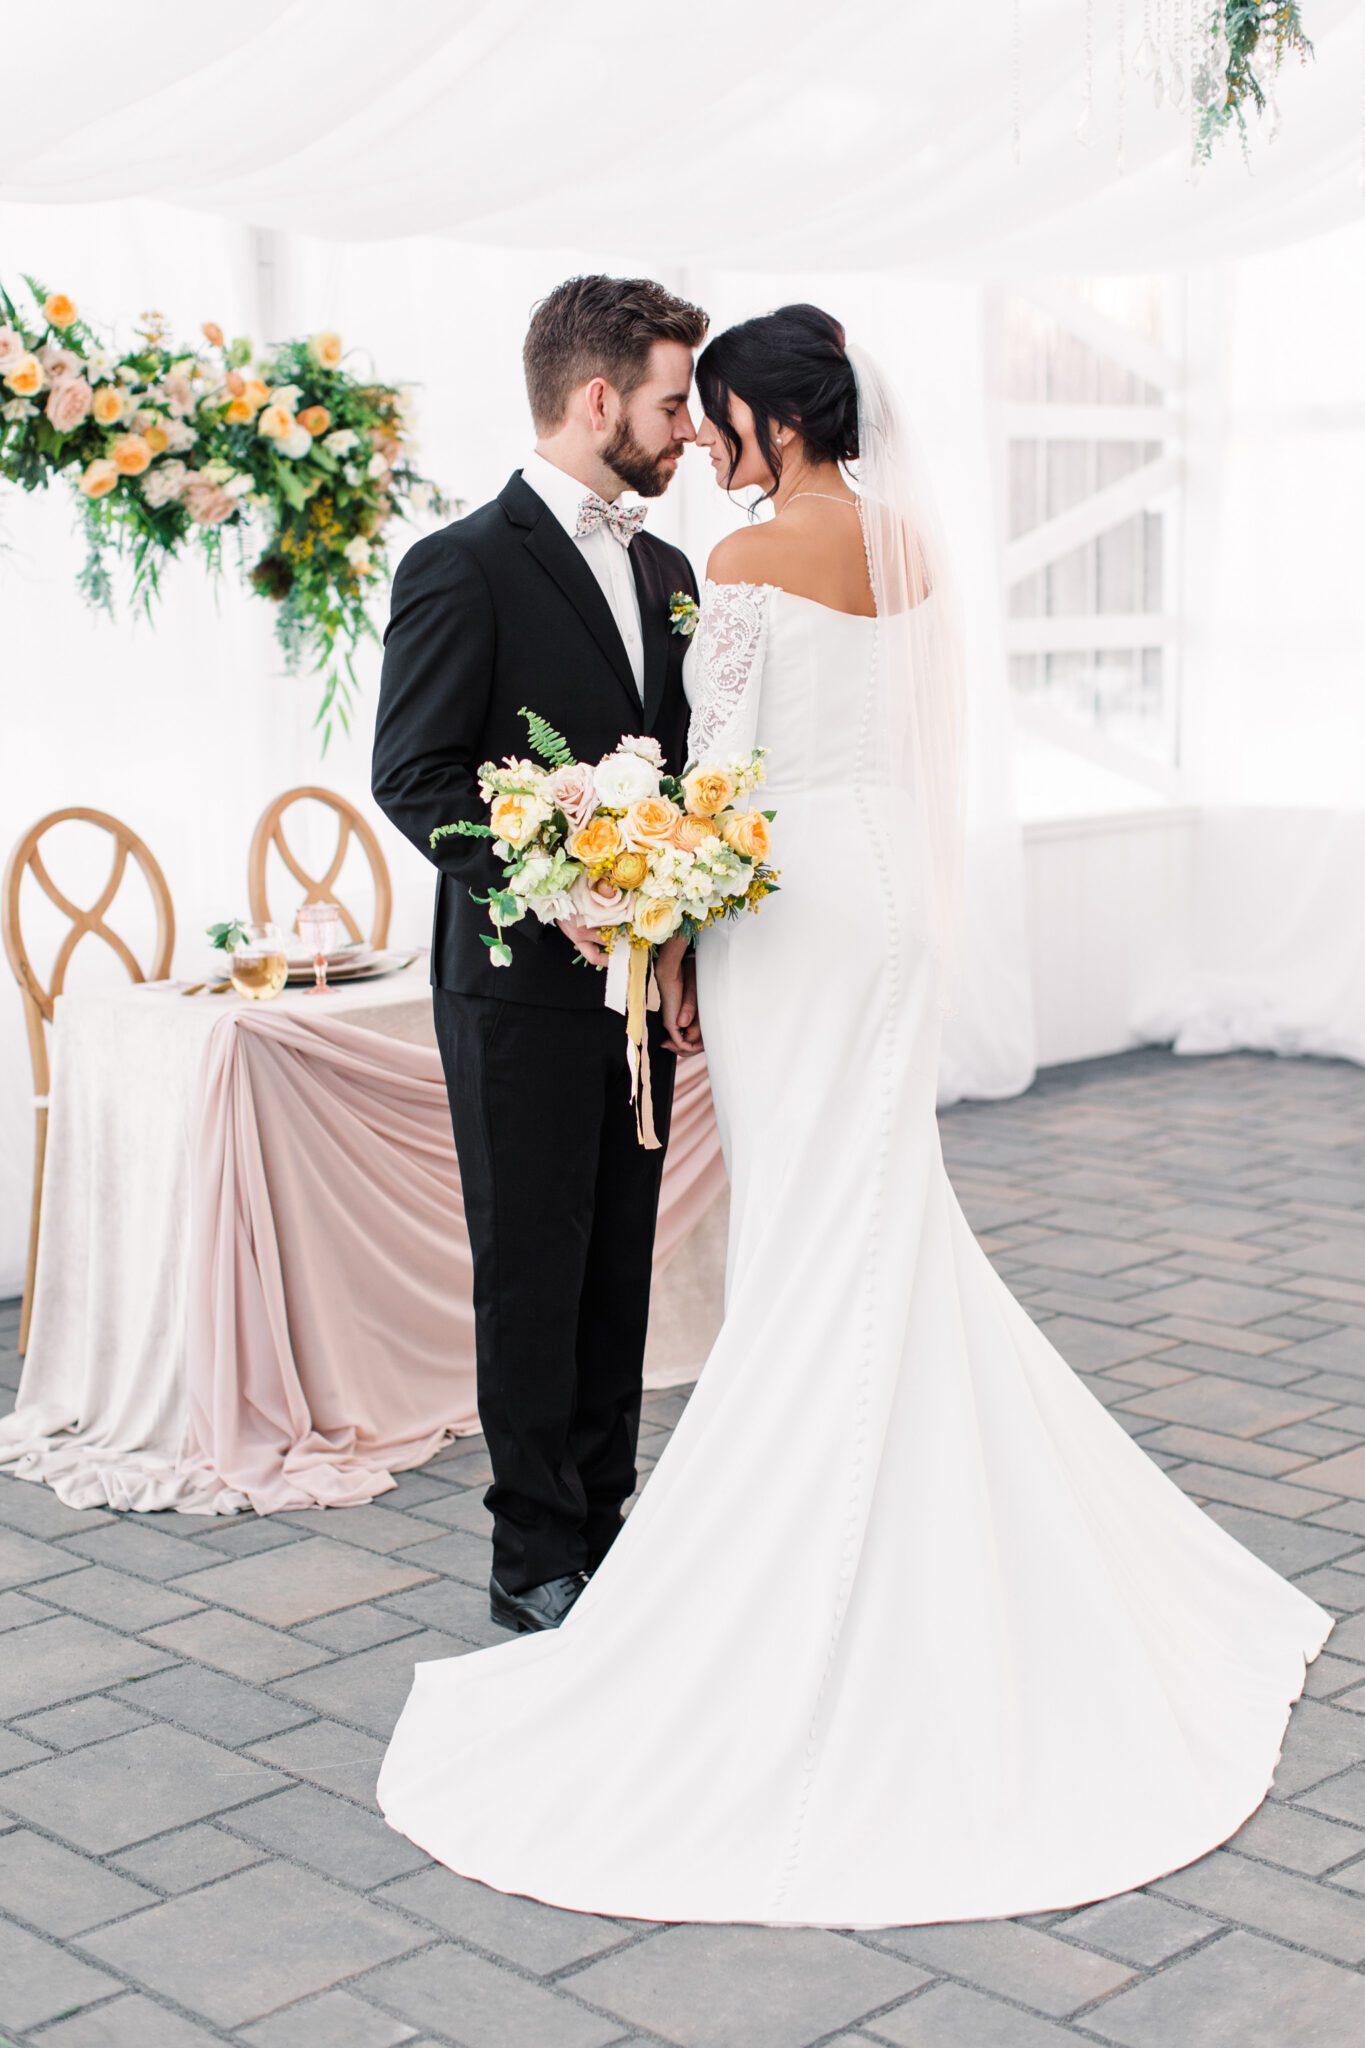 Bride and groom standing in an embrace at stunning tented wedding at Sunflower & Swallow. Spring inspired reception decor, complete with yellow and peach floral installation. 